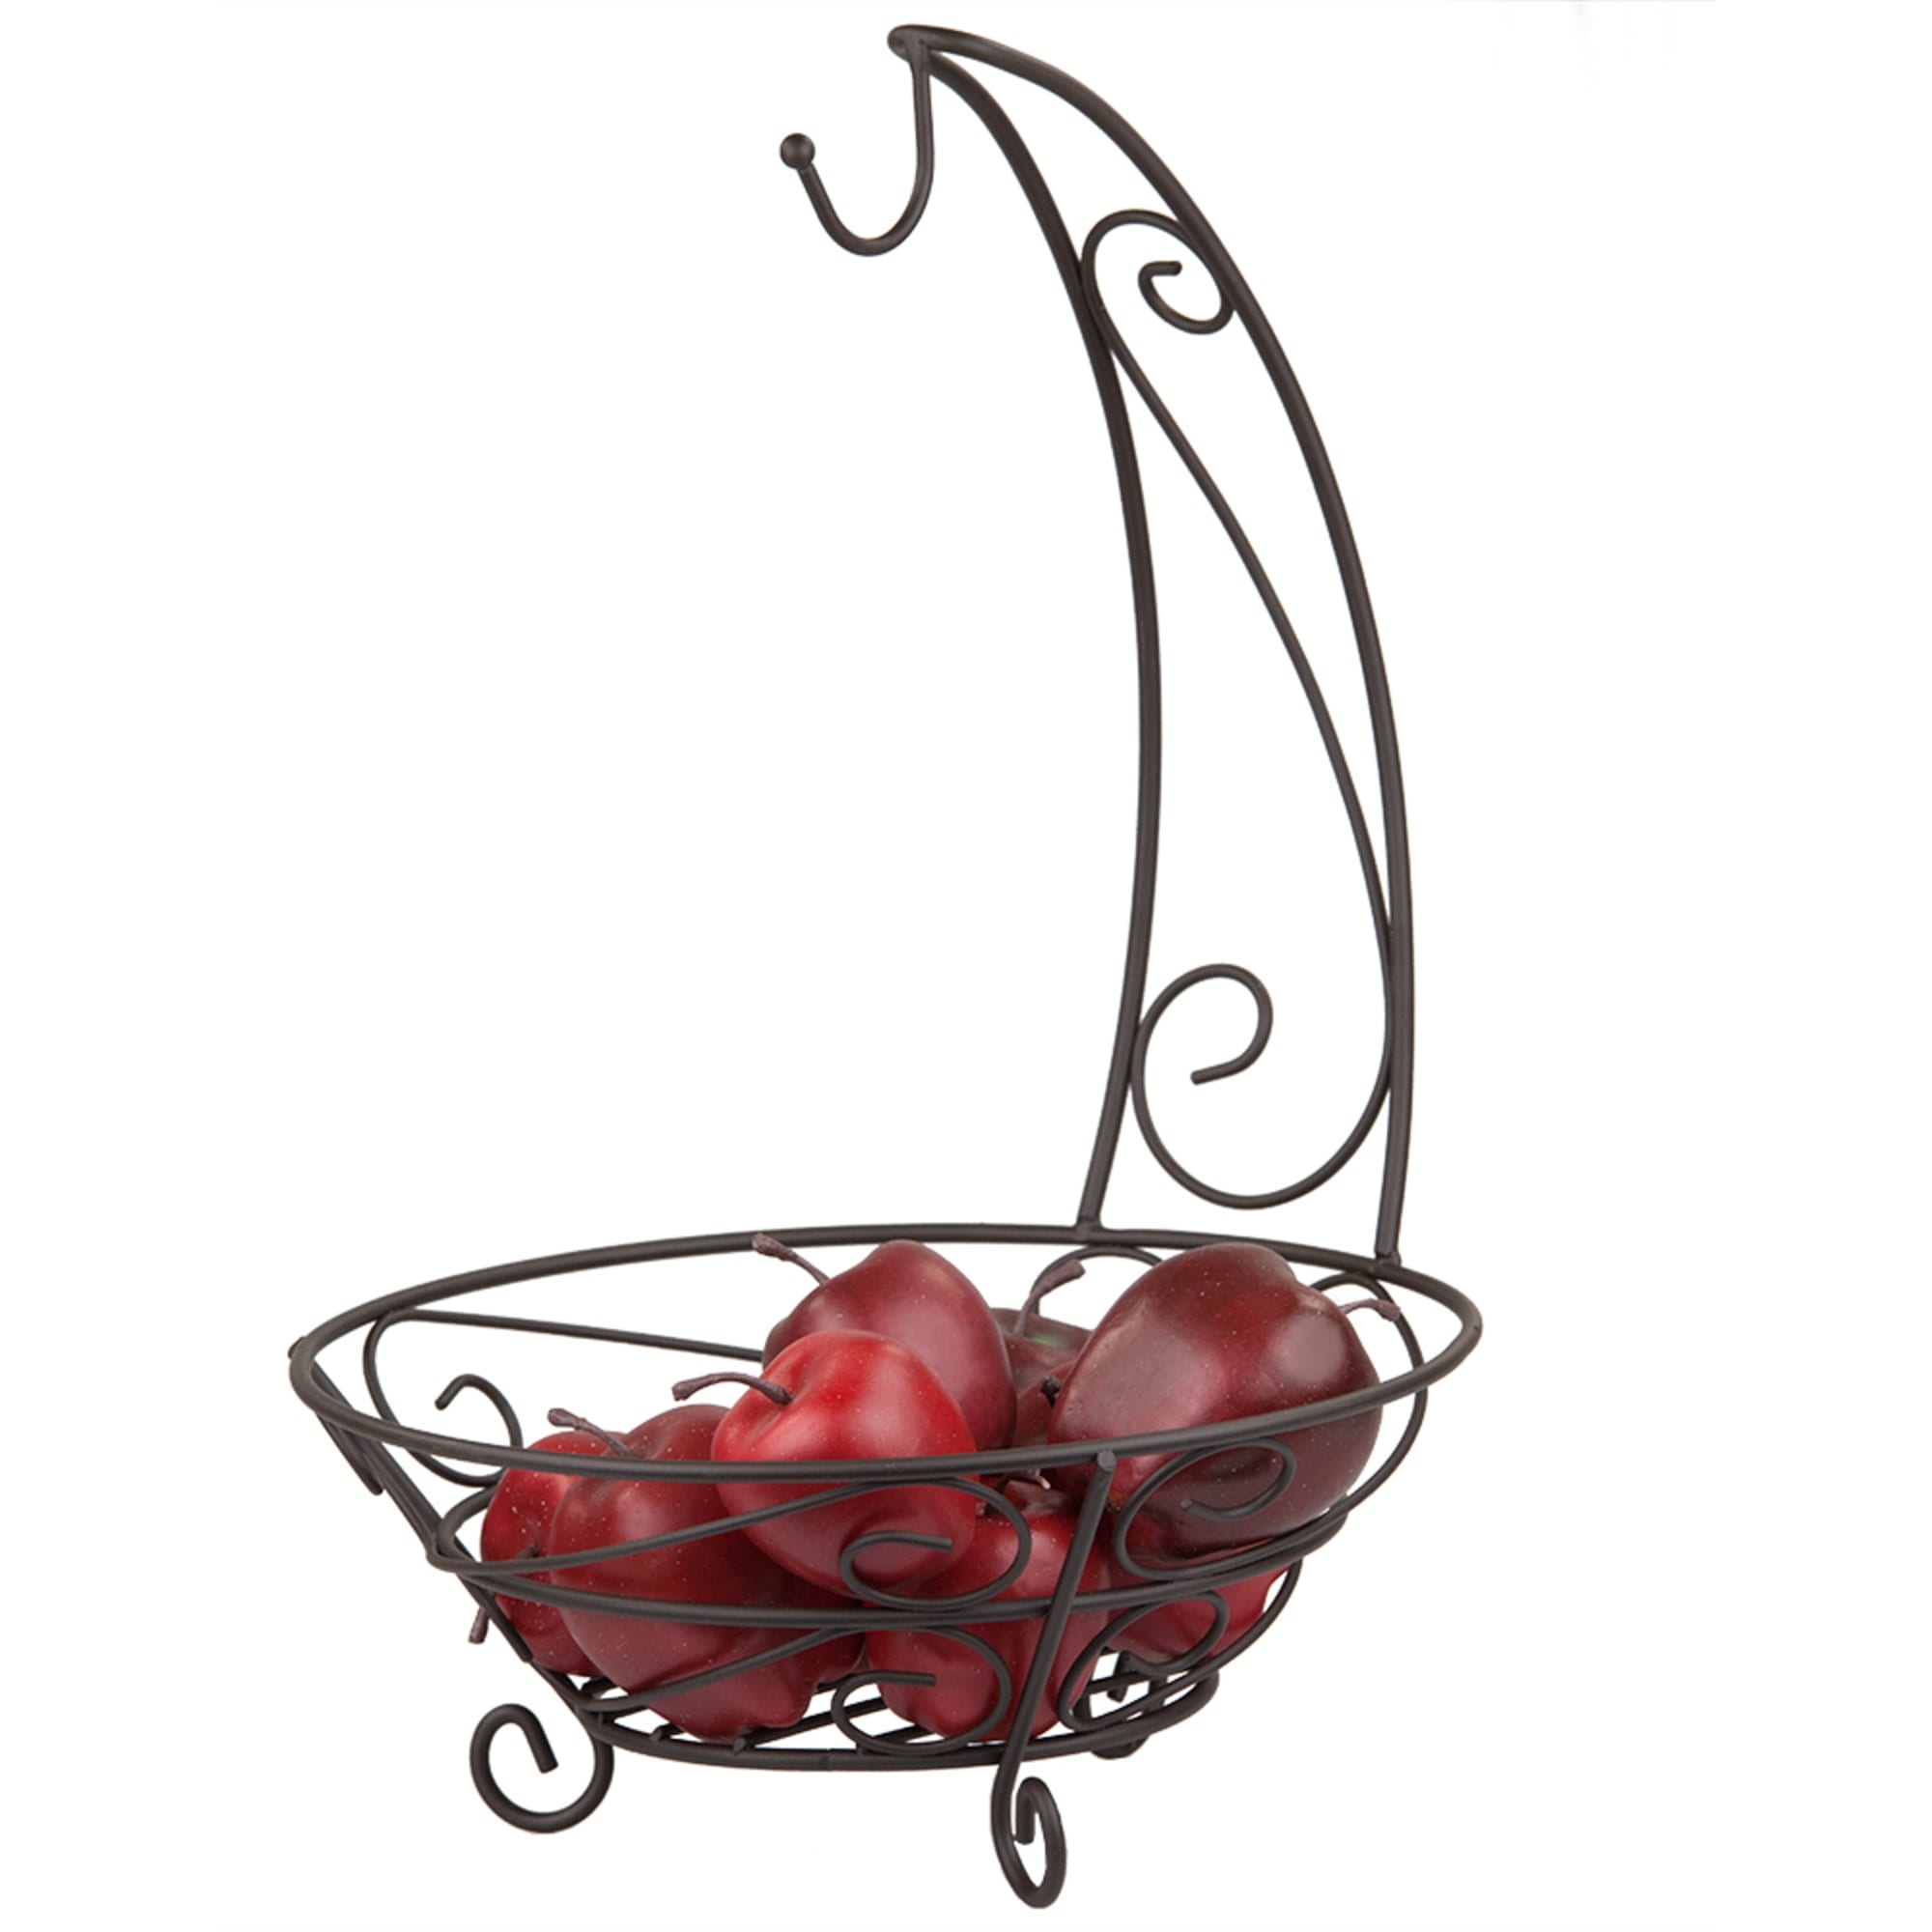 Home Basics Scroll Collection Steel Fruit Basket With Banana Tree, Bronze $10.00 EACH, CASE PACK OF 6